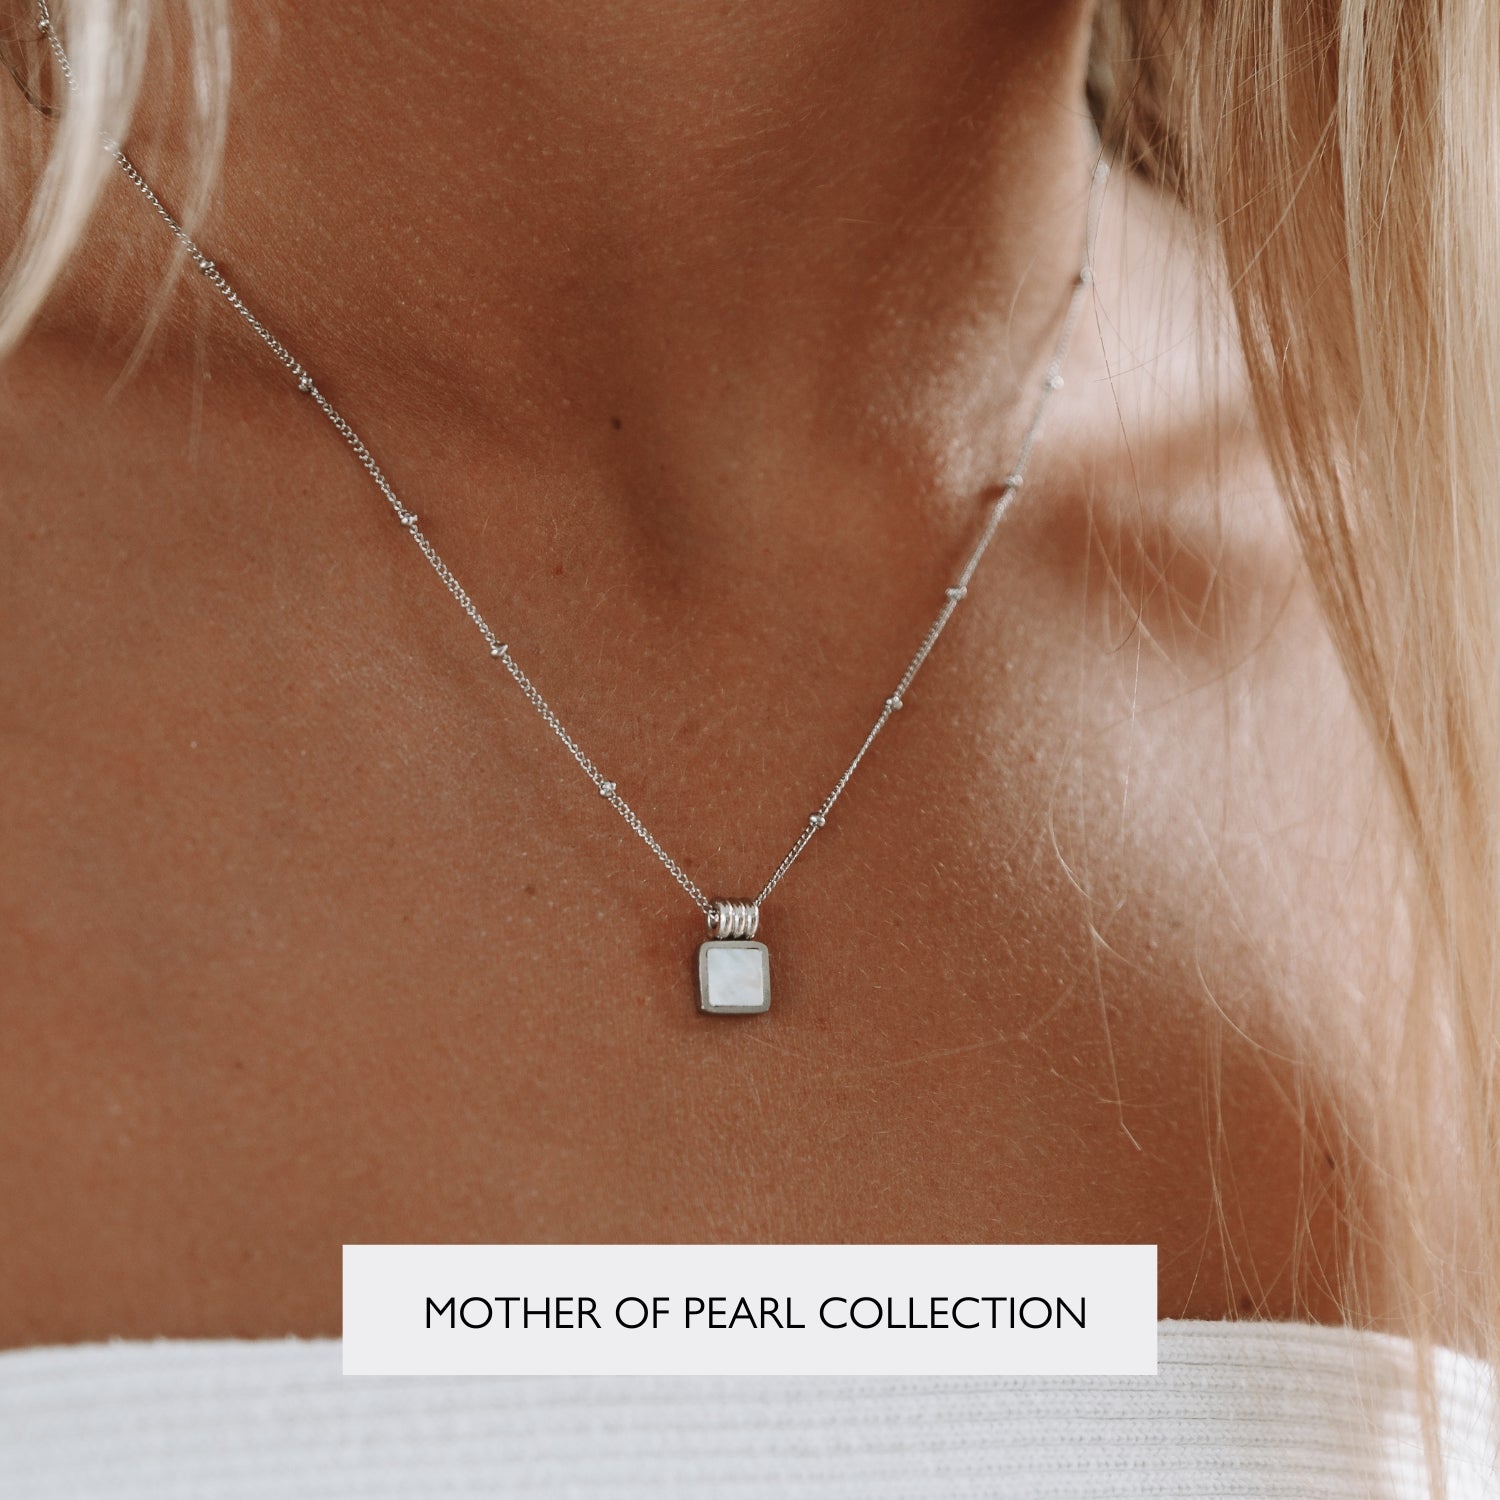 Mother of pearl collection